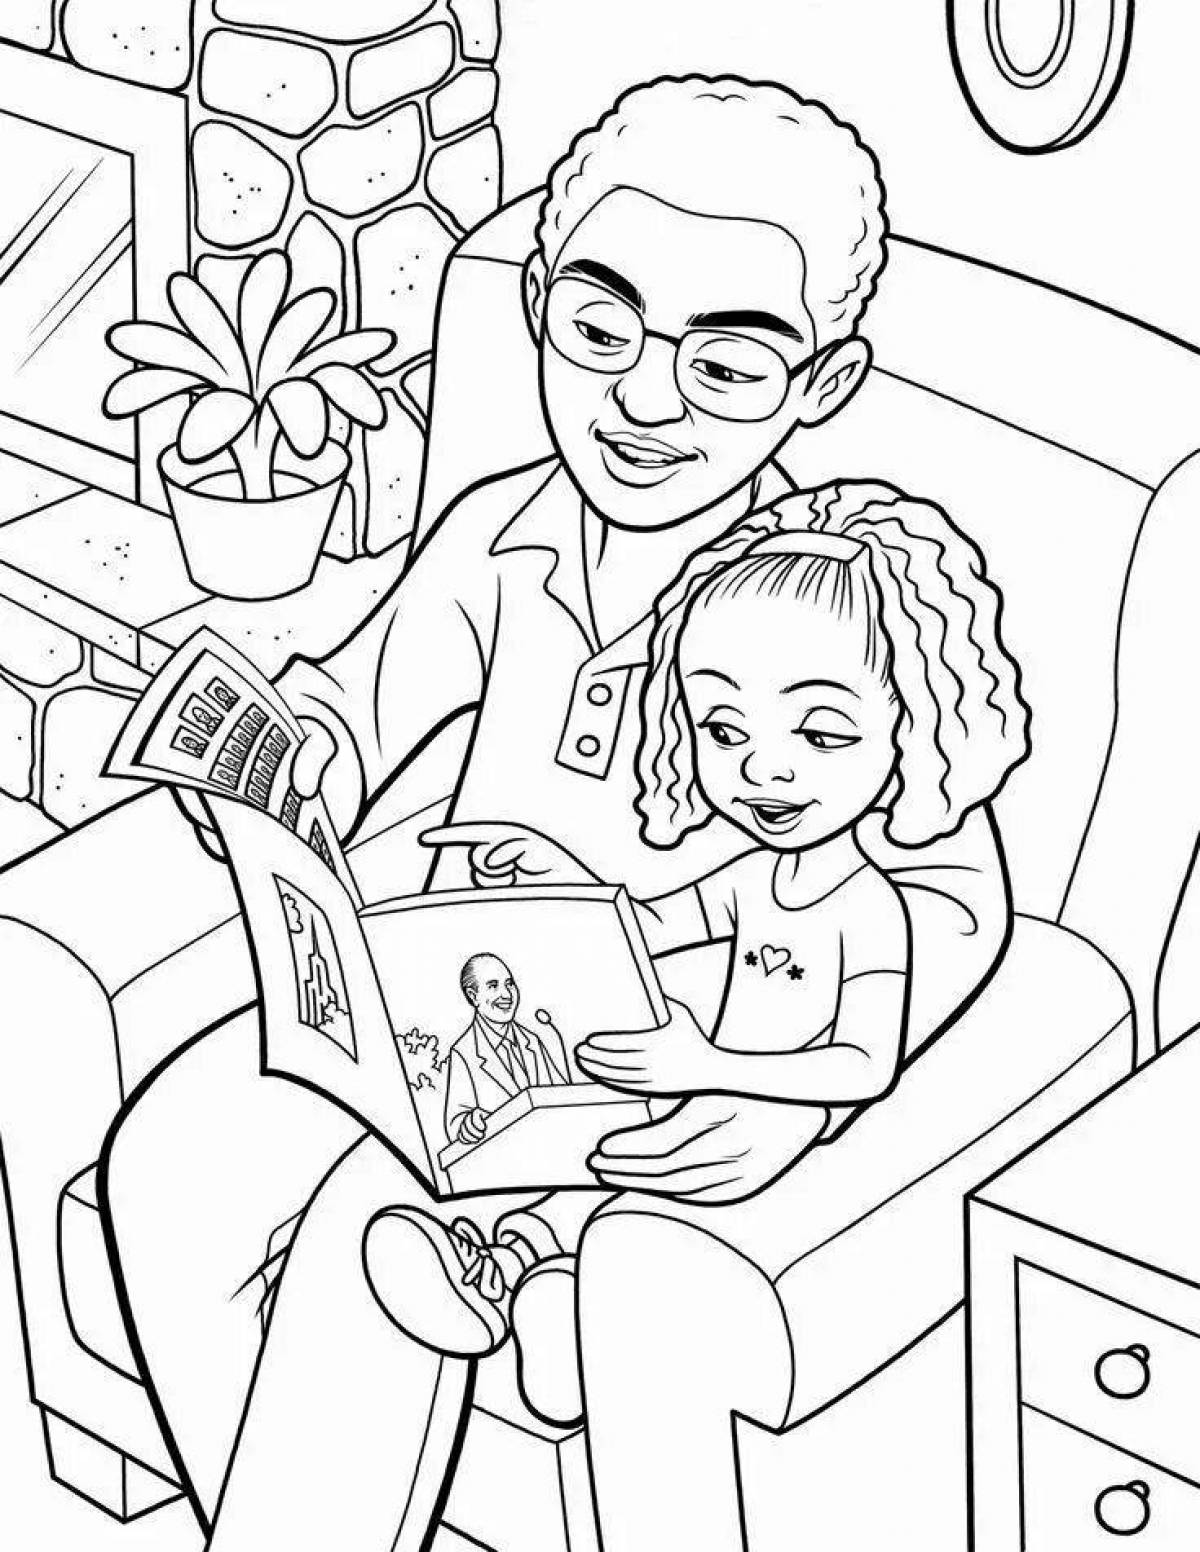 Funny dad and daughter coloring